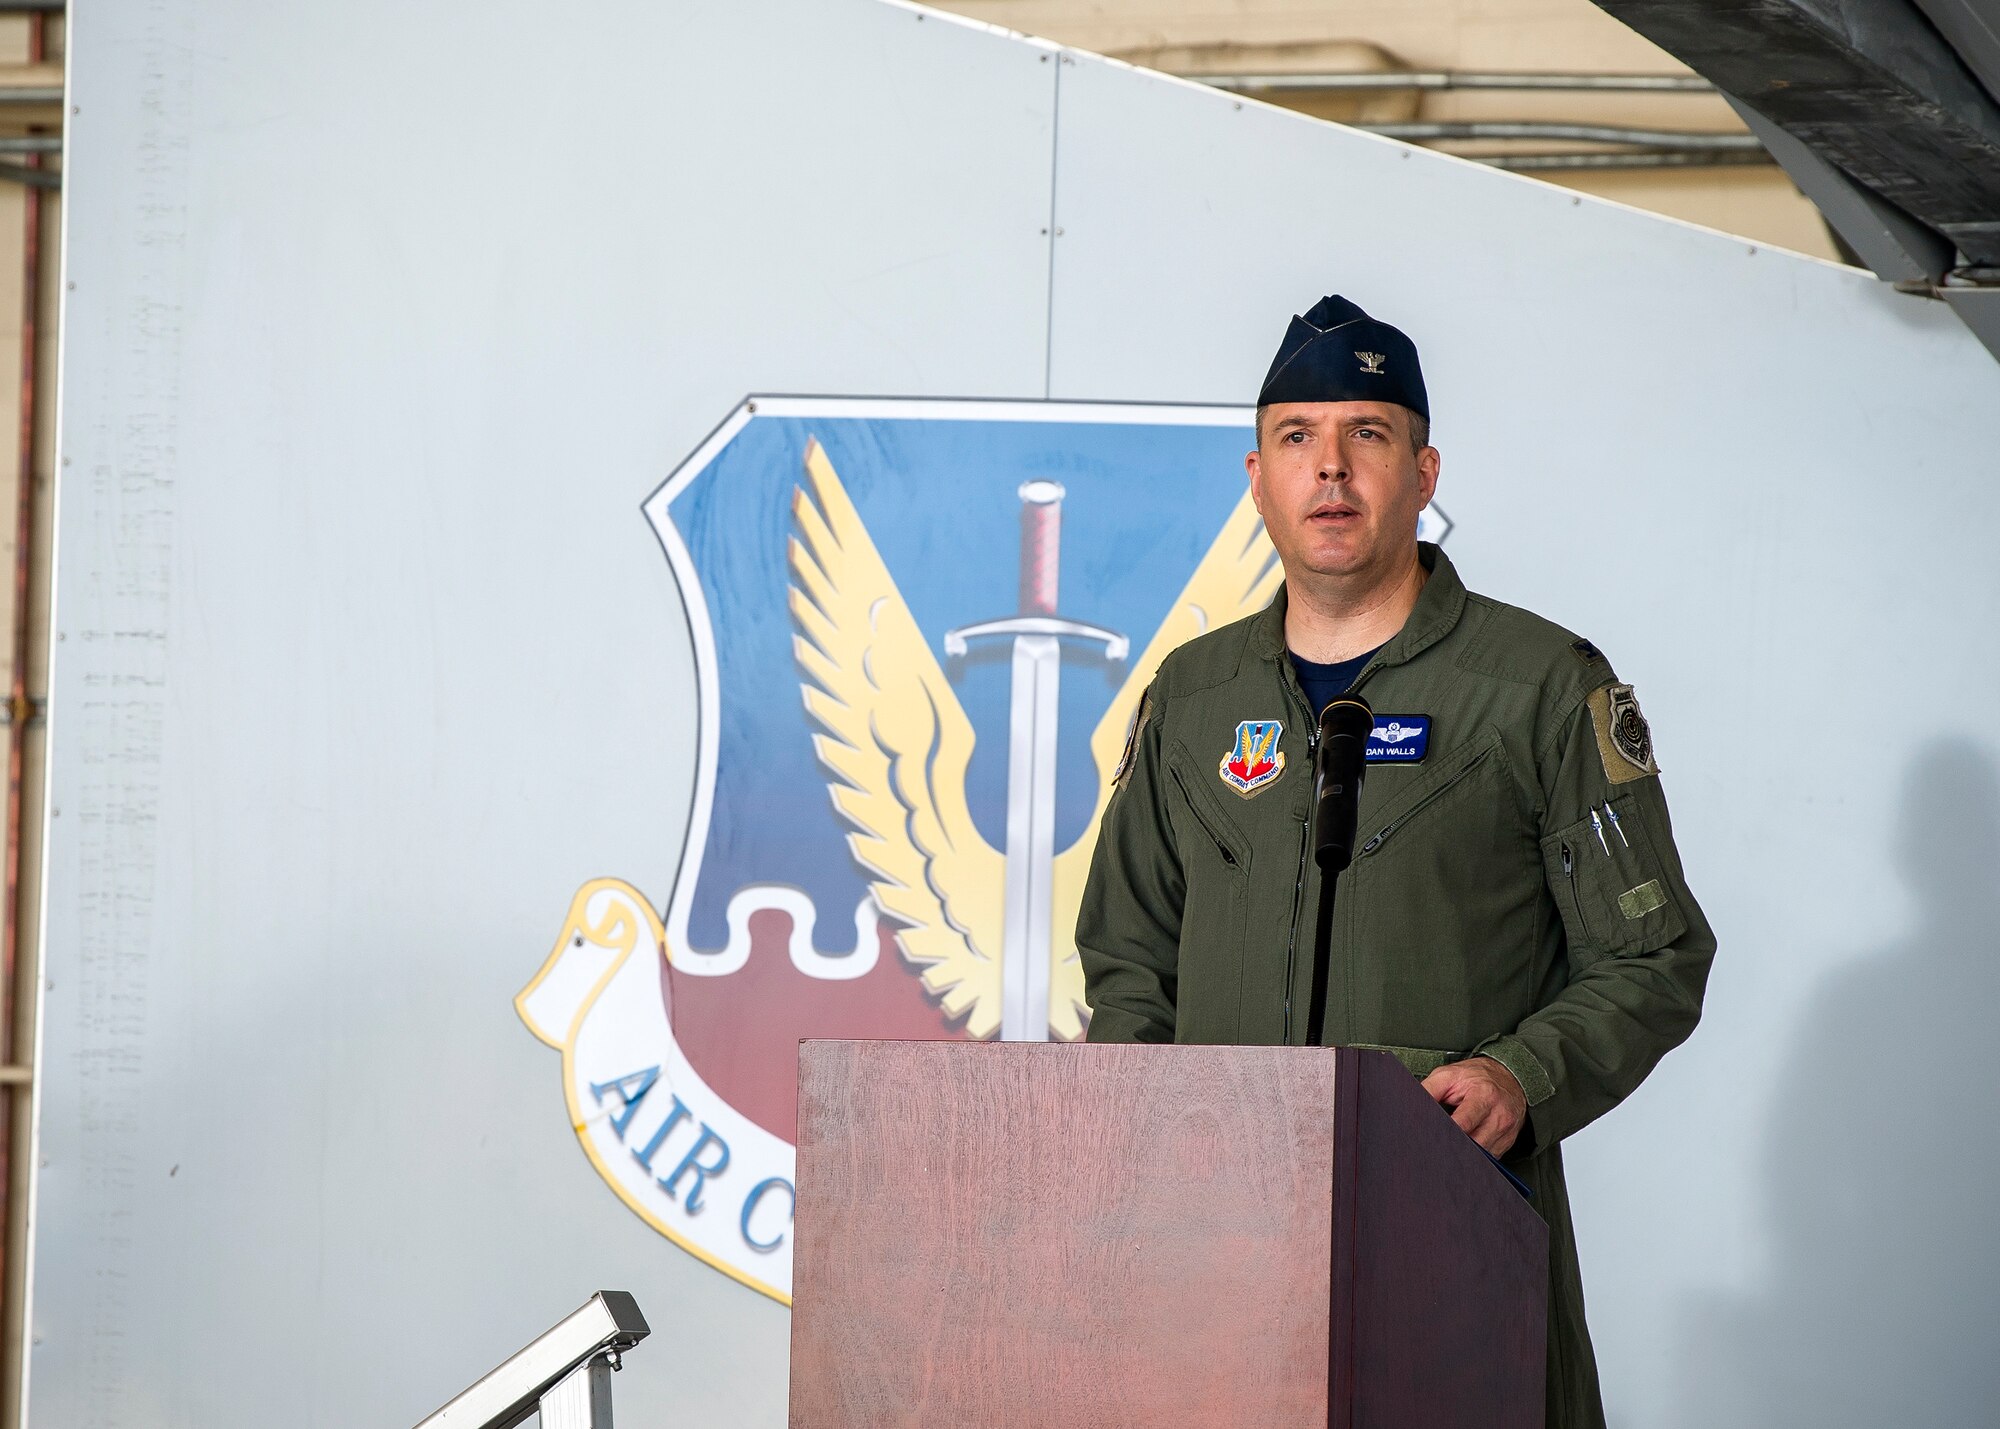 Col. Daniel Walls, 23d Wing commander, speaks during a change of command ceremony, July 19, 2019, at Moody Air Force Base, Ga. The ceremony is a military tradition that represents a formal transfer of unit’s authority and responsibility from one commander to another. (U.S. Air Force photo by Airman 1st Class Eugene Oliver)